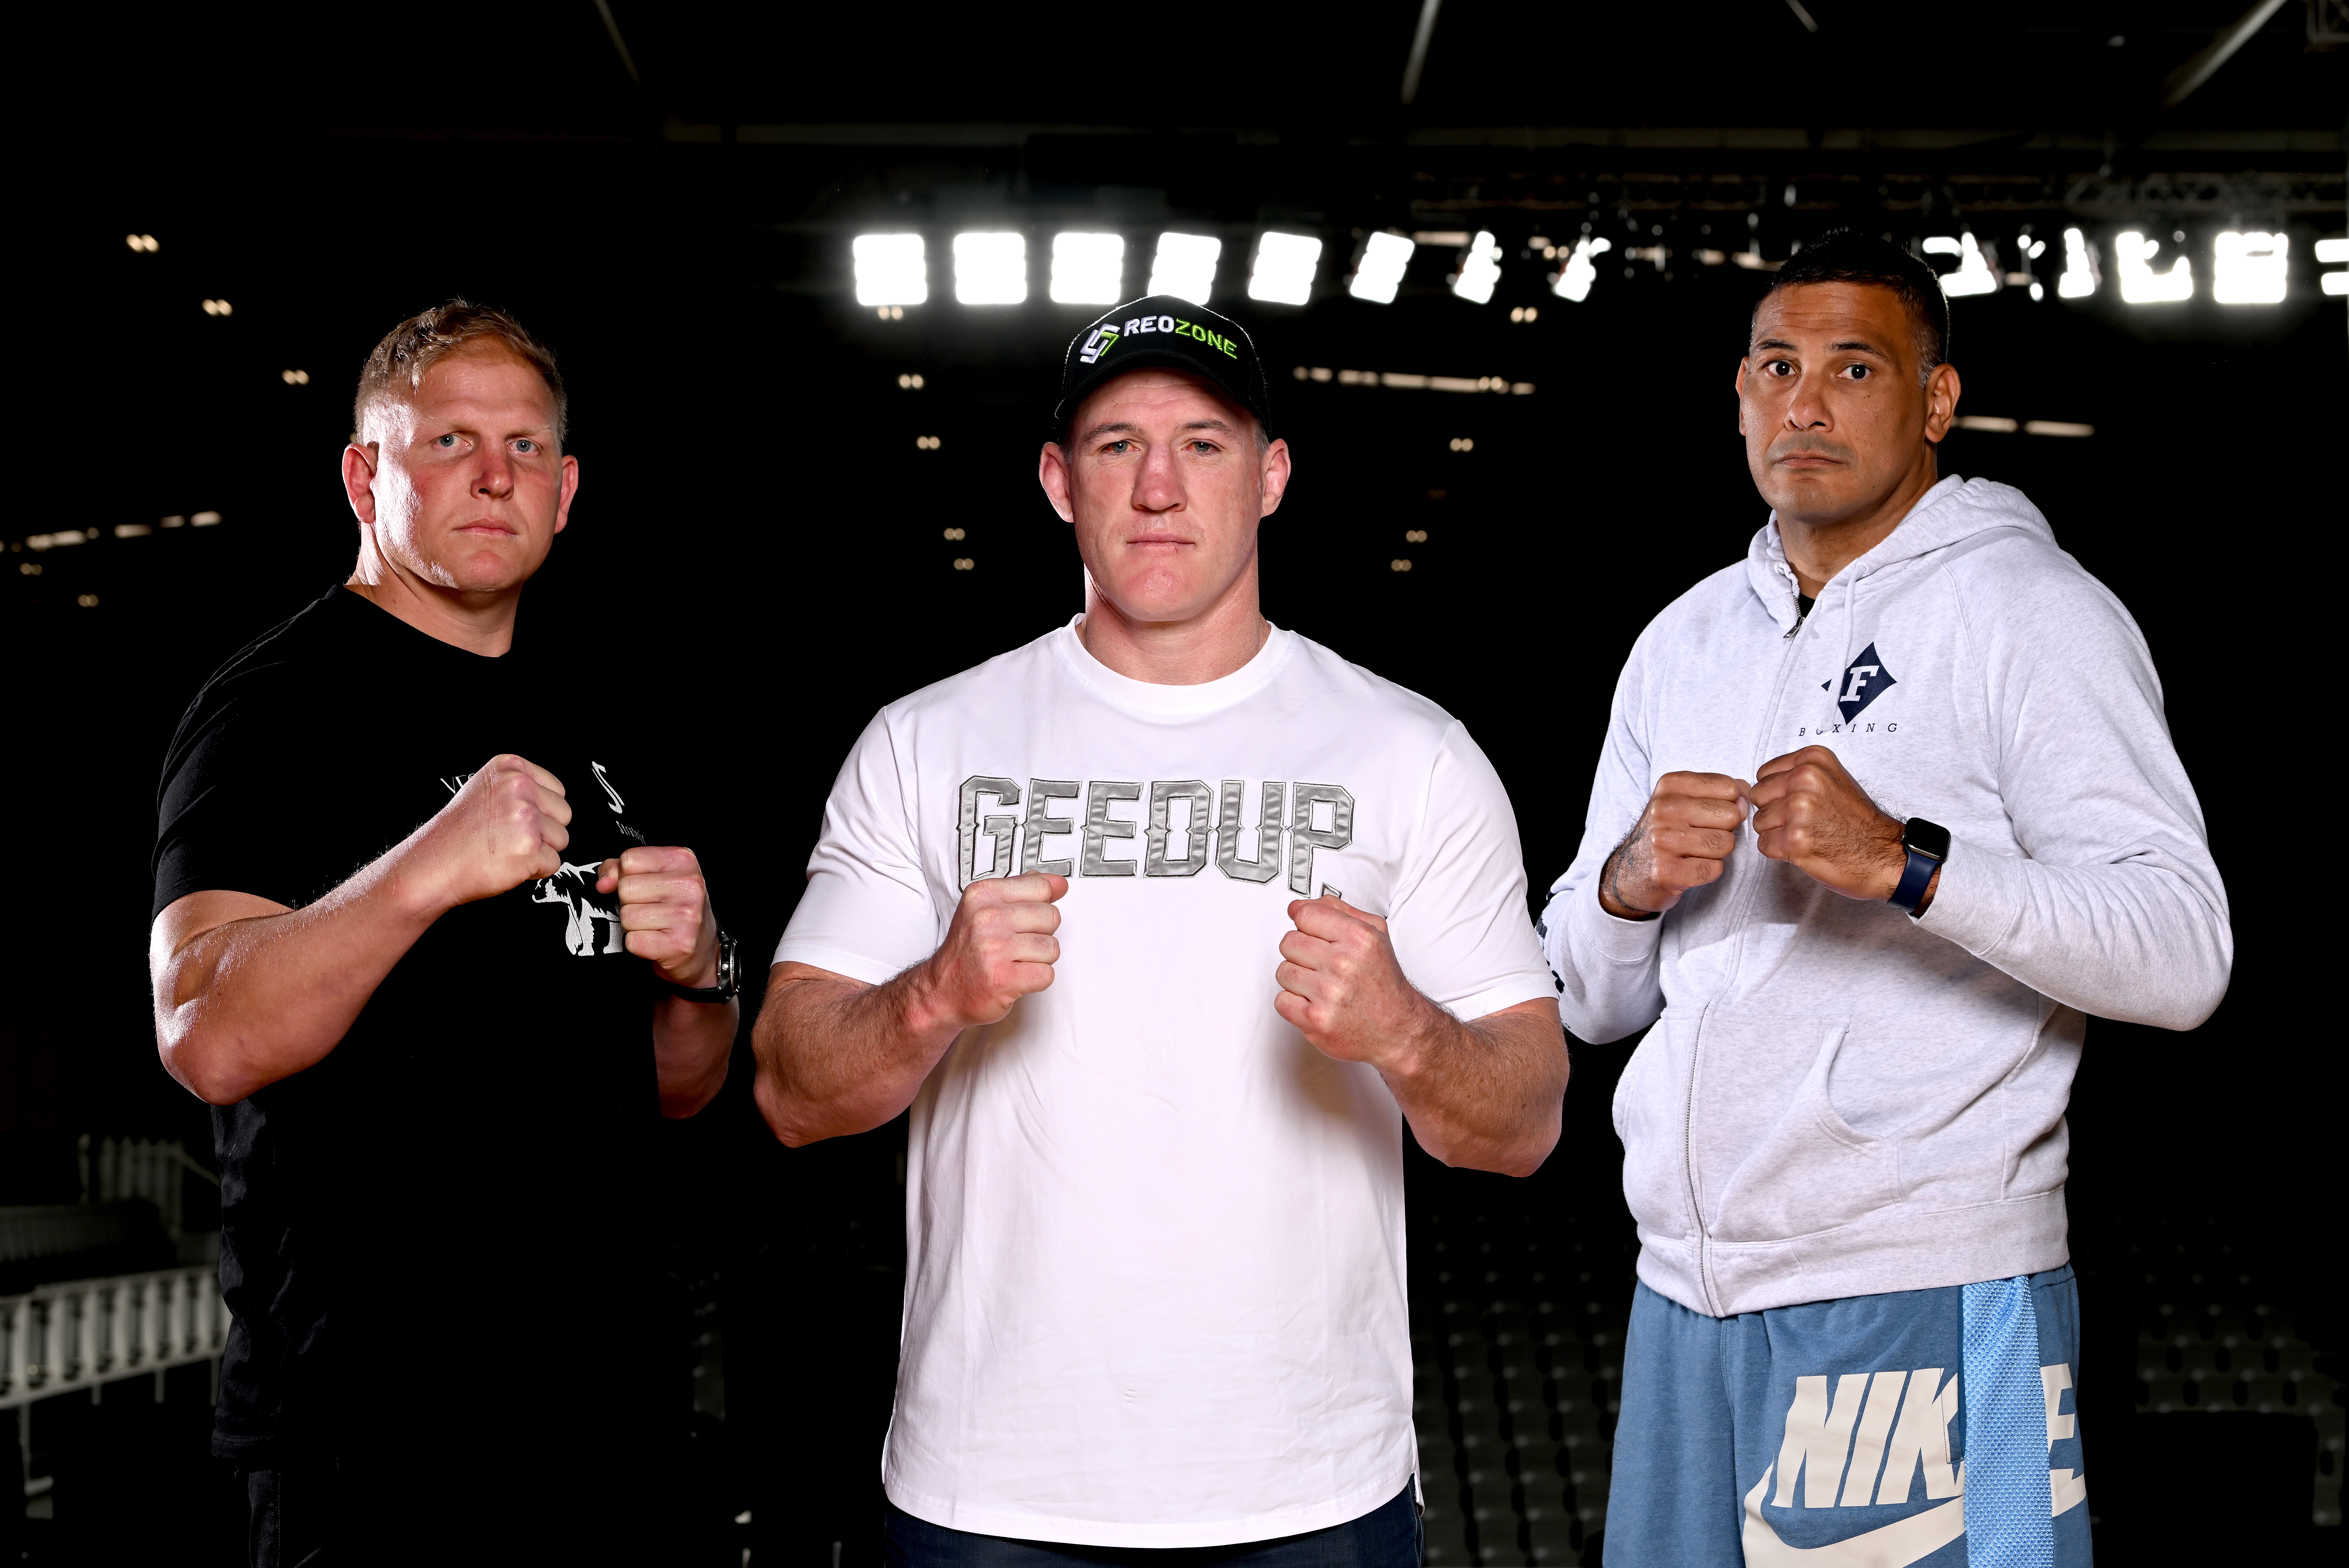 Paul Gallen (centre) will fight Ben Hannant and Justin Hodges at Nissan Arena on August 10.